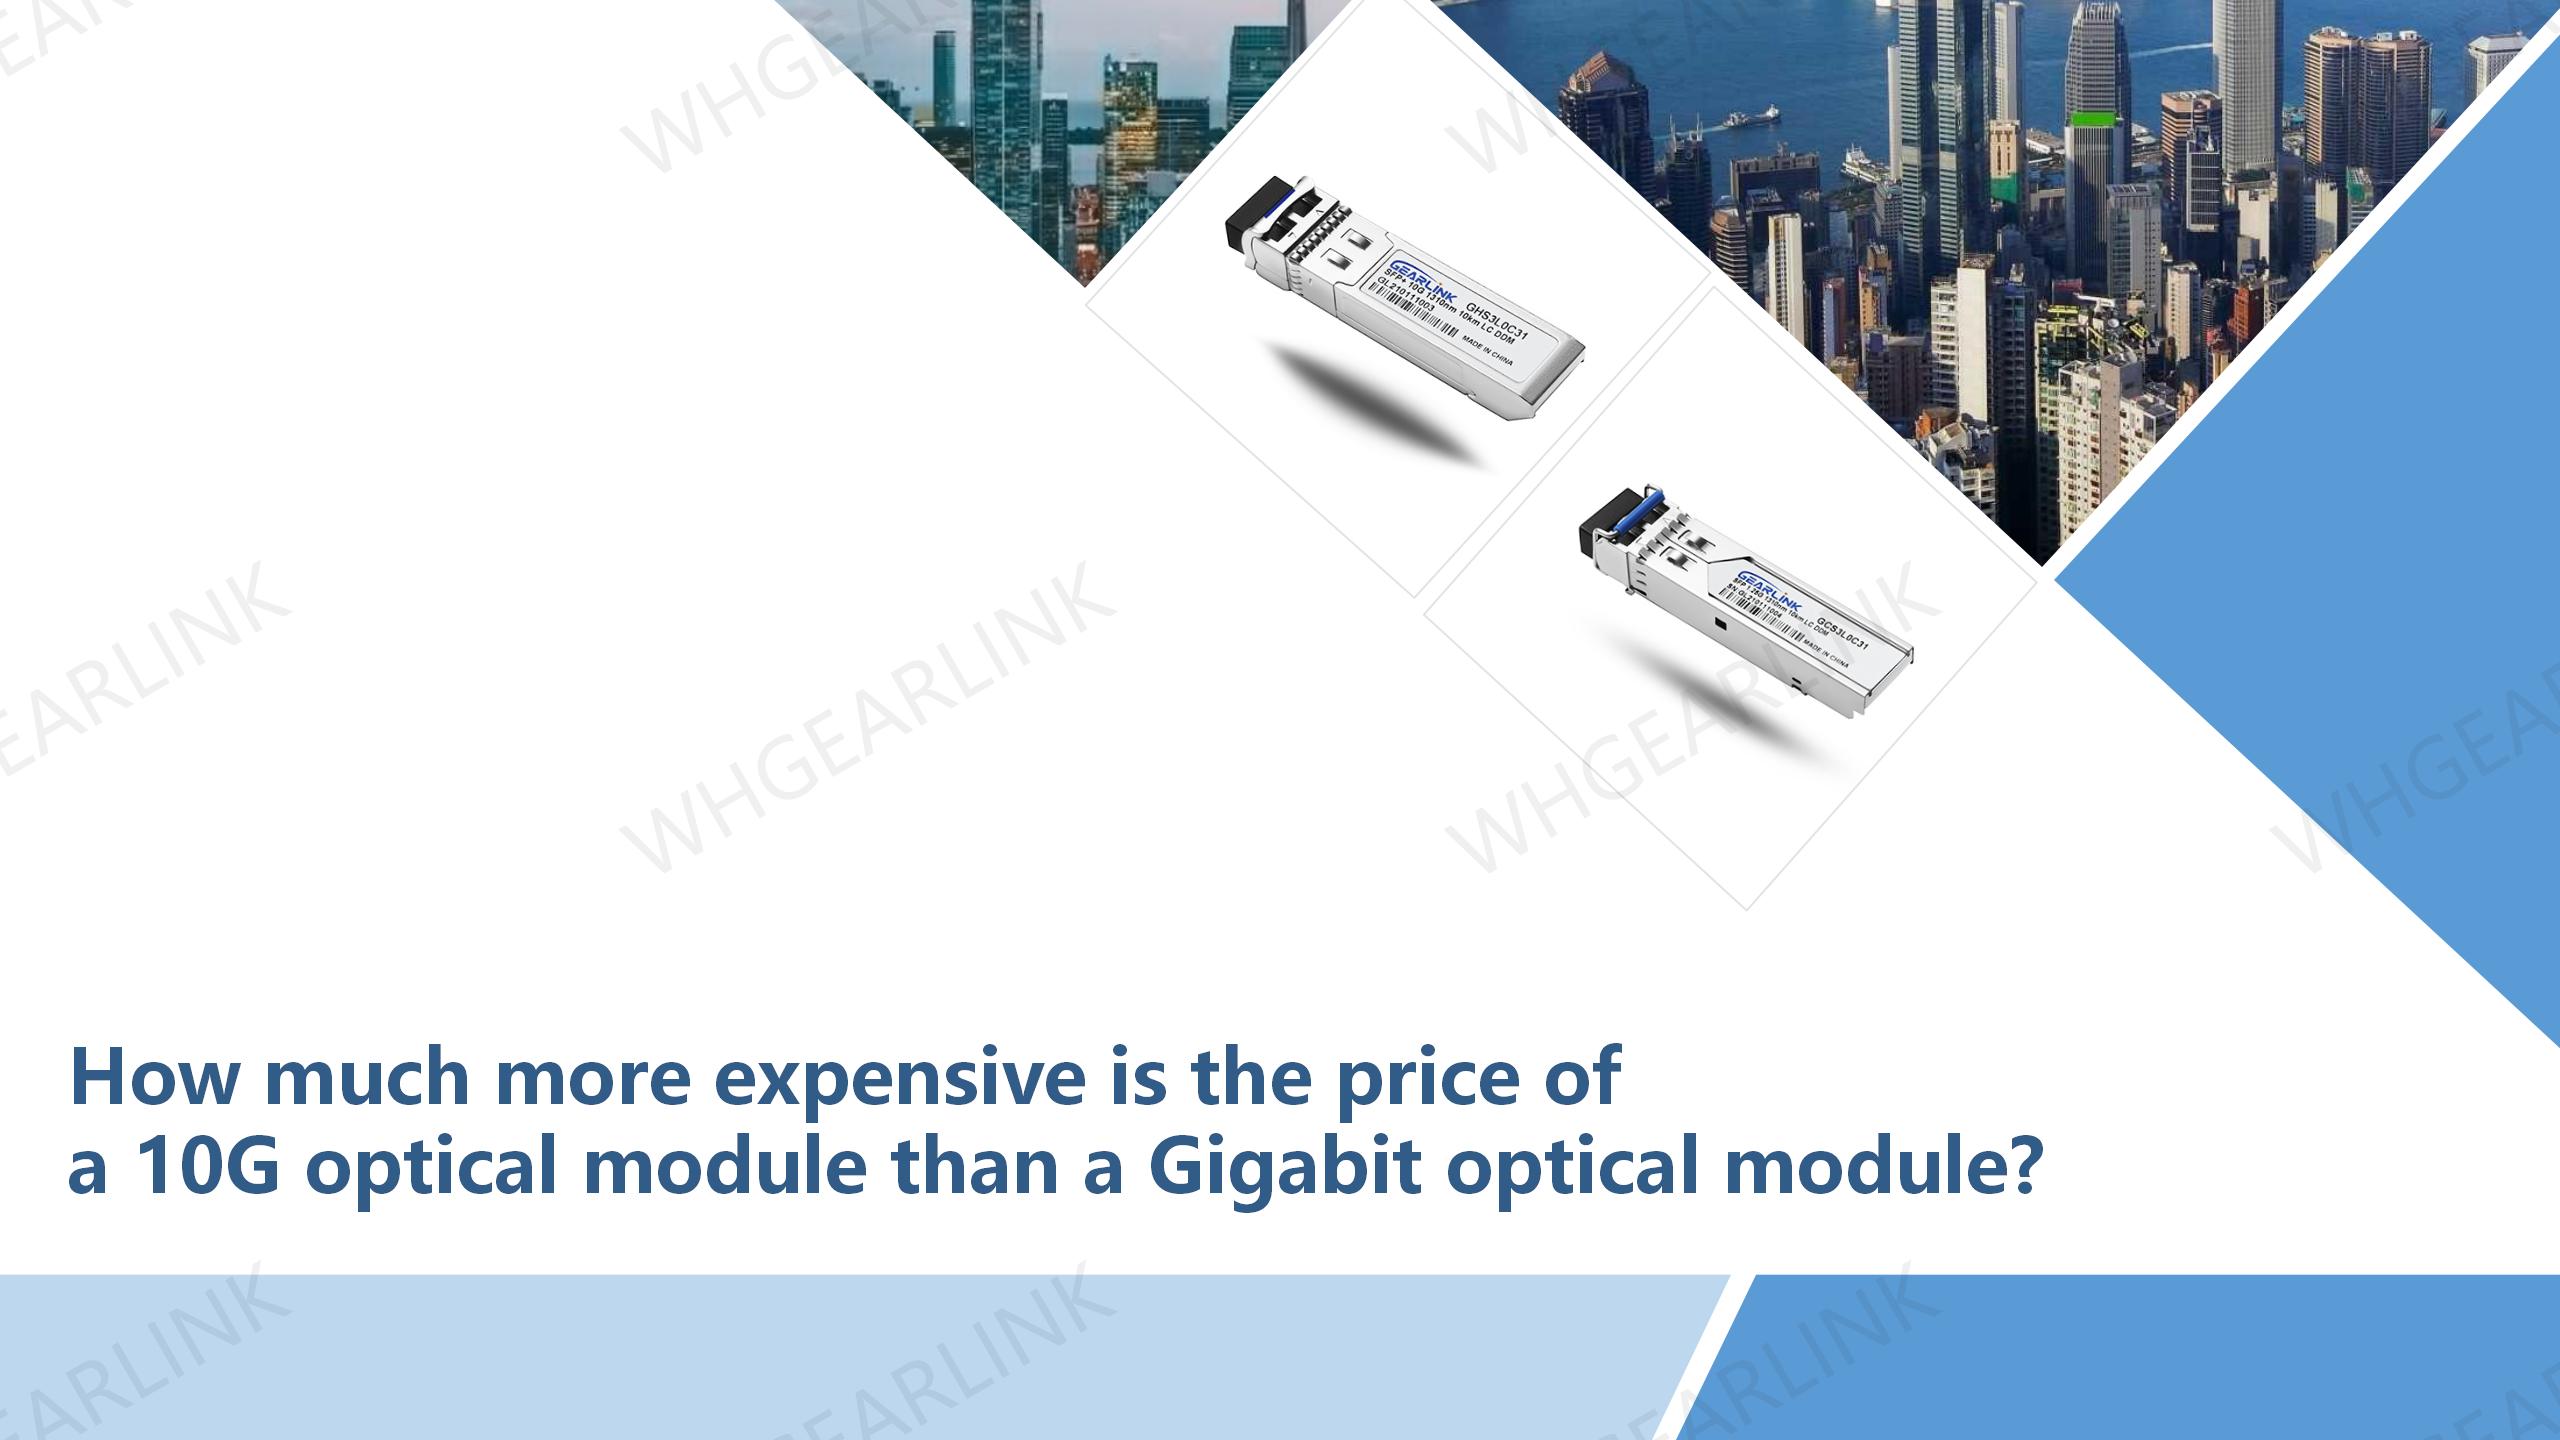 How much more expensive is the price of a 10G optical module than a Gigabit optical module?